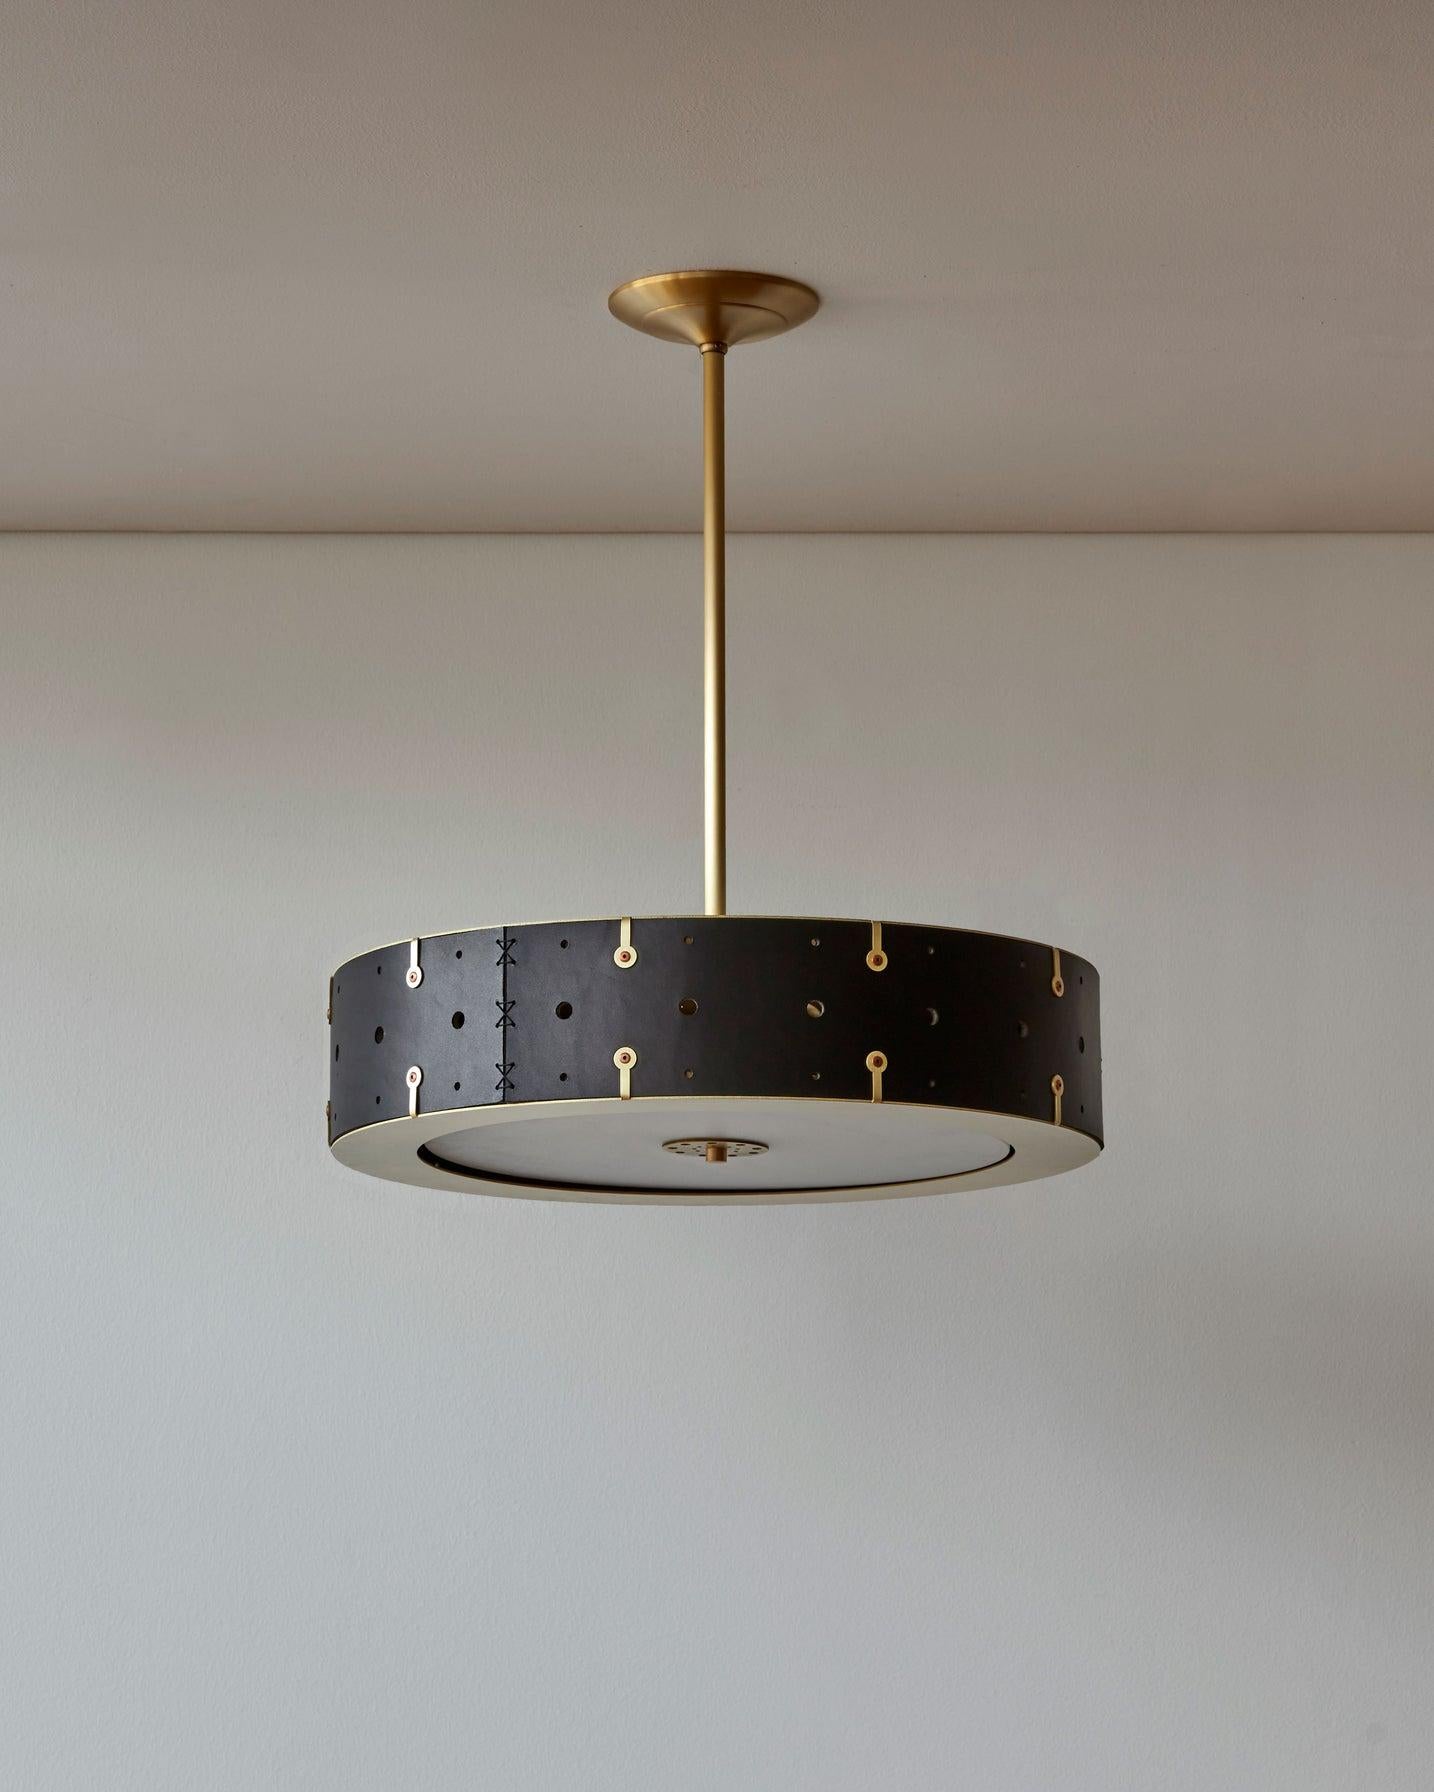 Composed of a hand-sewn leather drum fitted between a satin brass top and bottom ring, the Sarah can be customized with the drop height that is right for your space and the pipe can be removed altogether to create a flush-mount fixture. A thin white